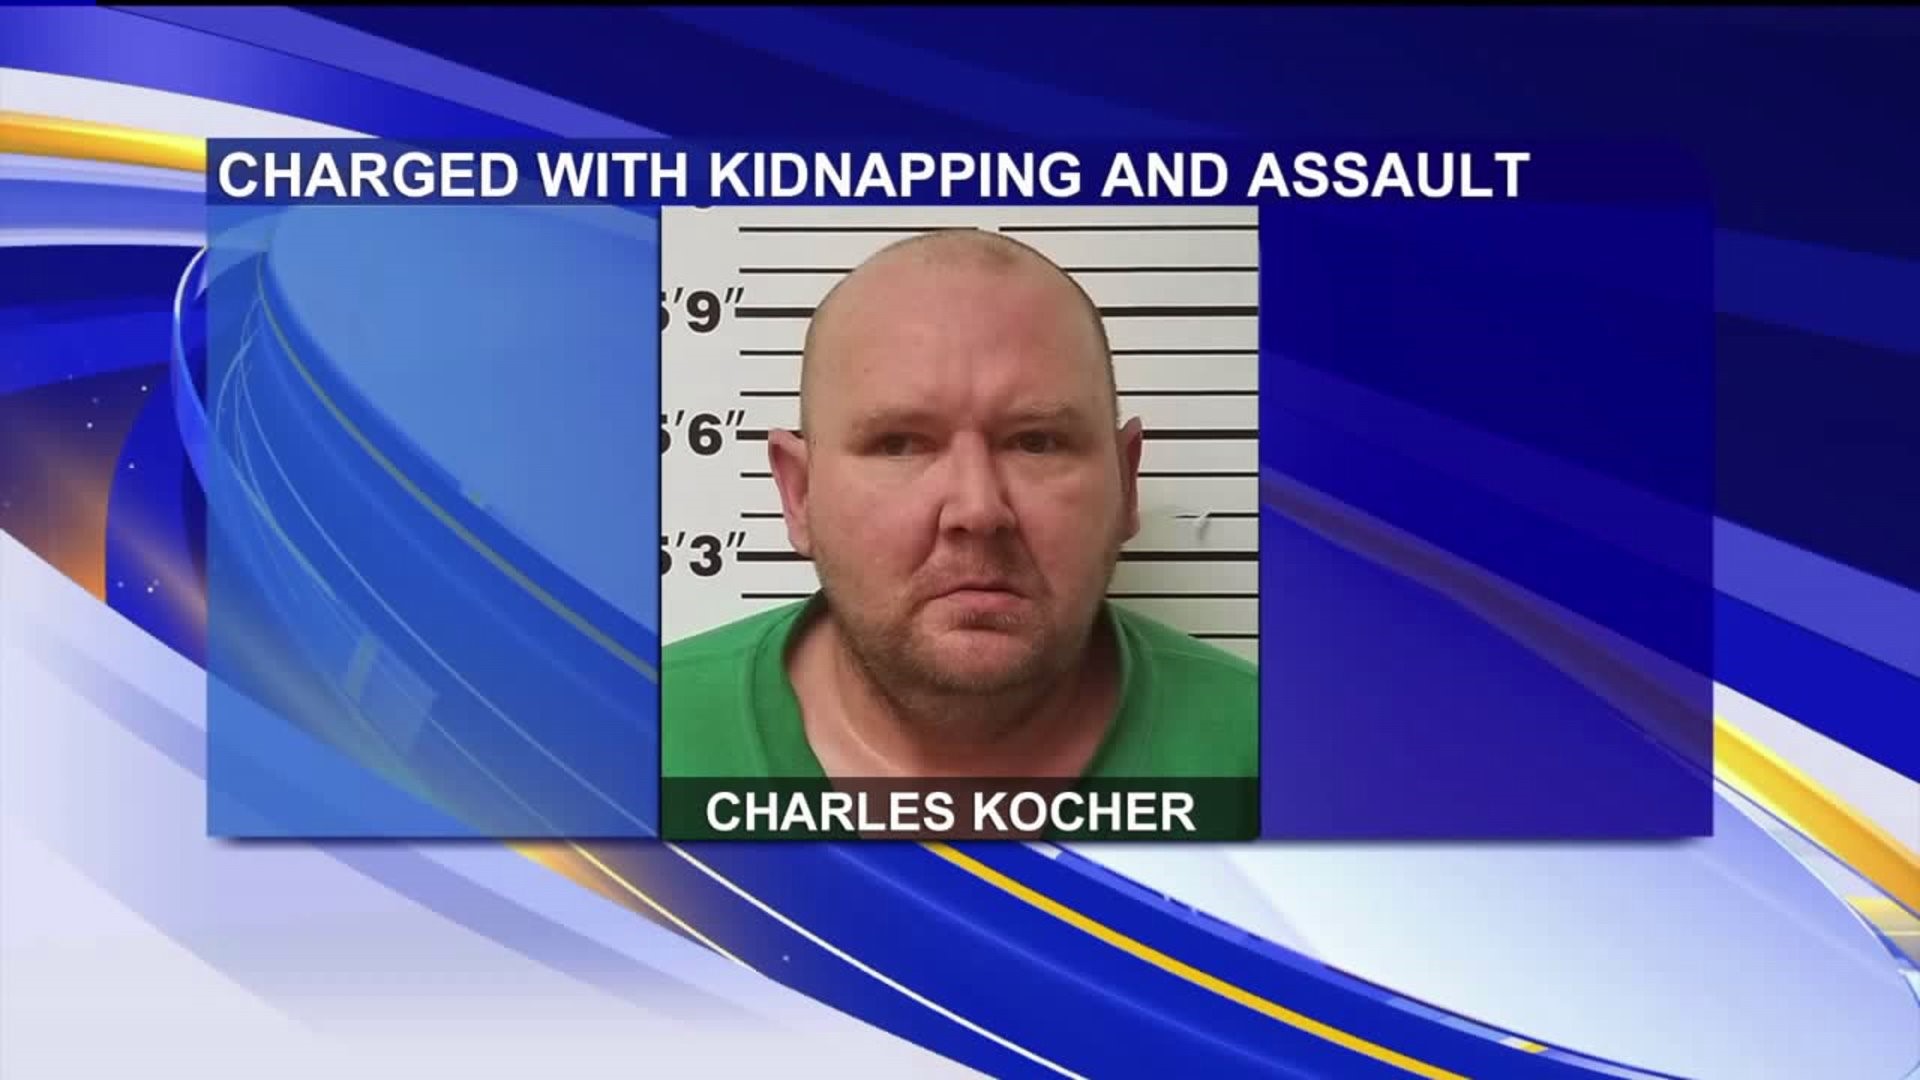 Man Facing Charges After Allegedly Kidnapping and Assaulting Woman